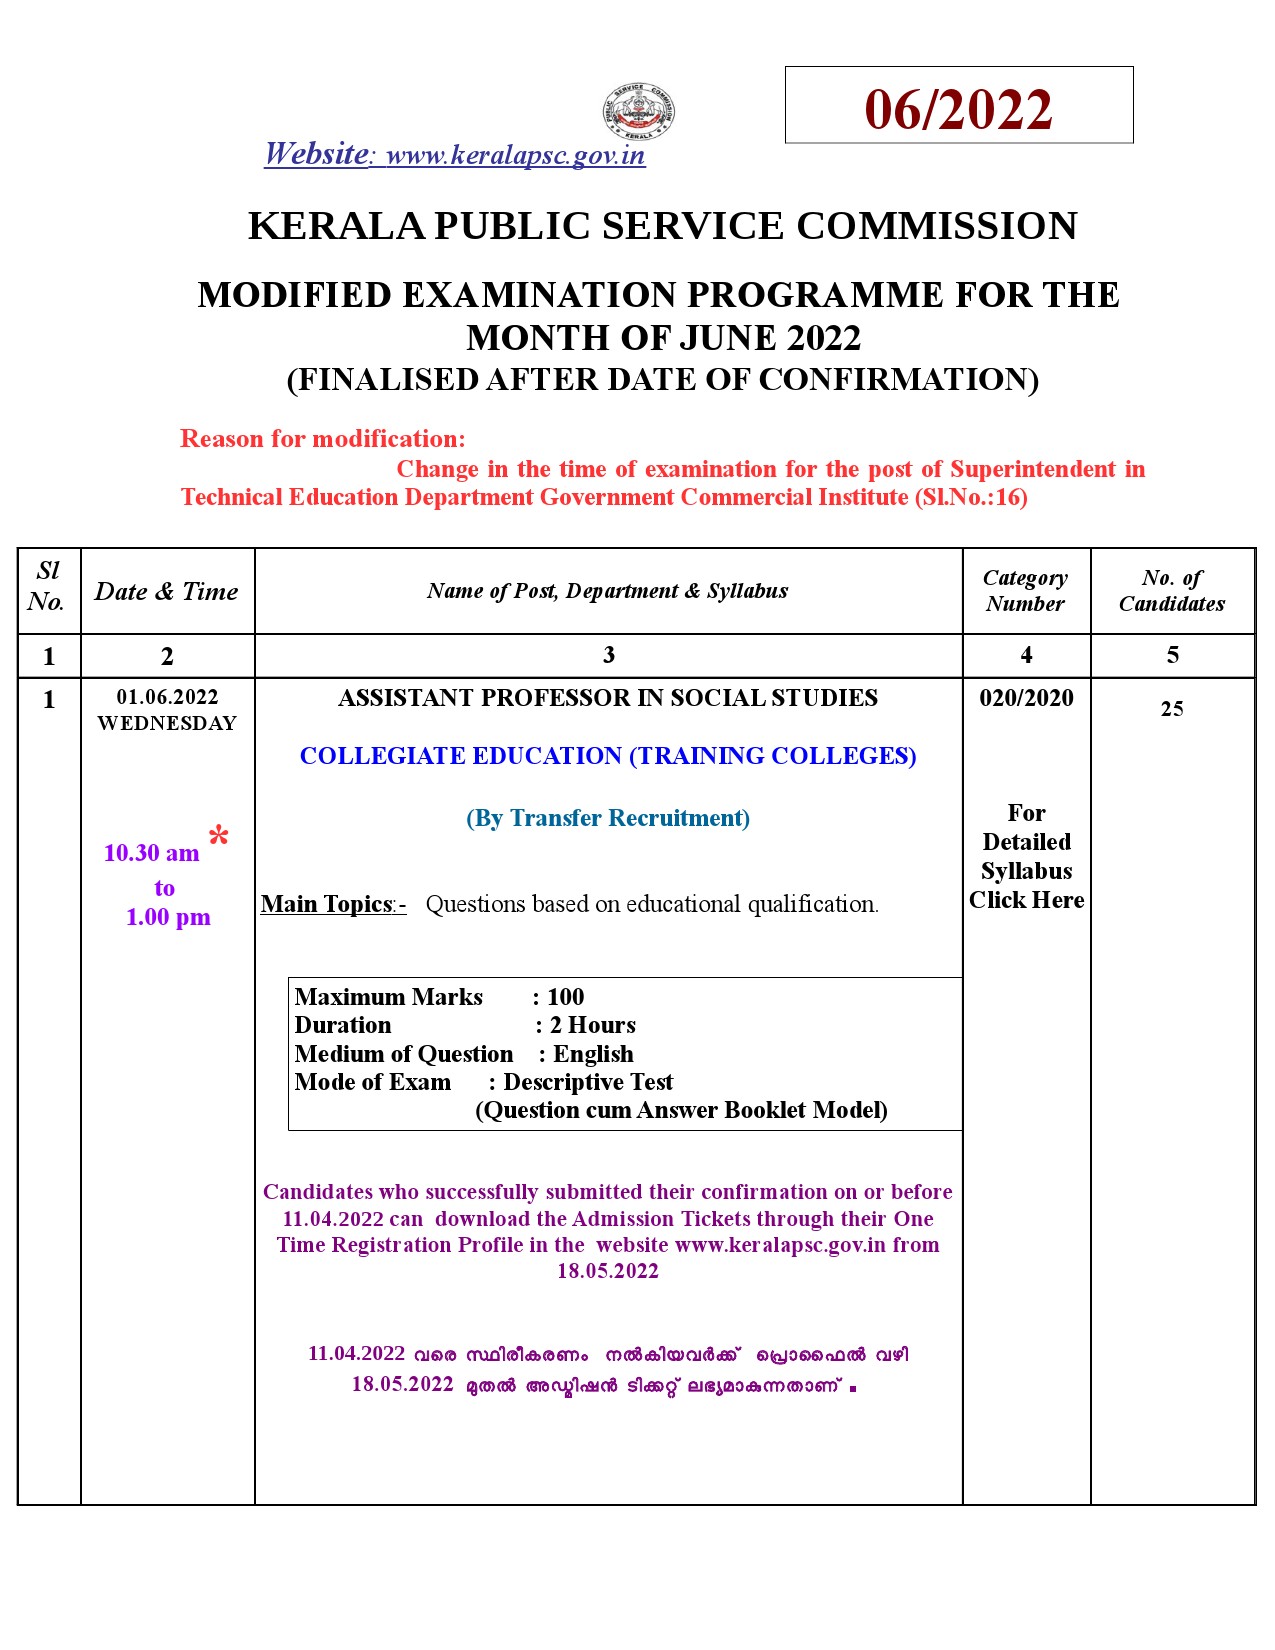 KPSC MODIFIED EXAMINATION PROGRAMME FOR THE MONTH OF JUNE 2022 - Notification Image 1